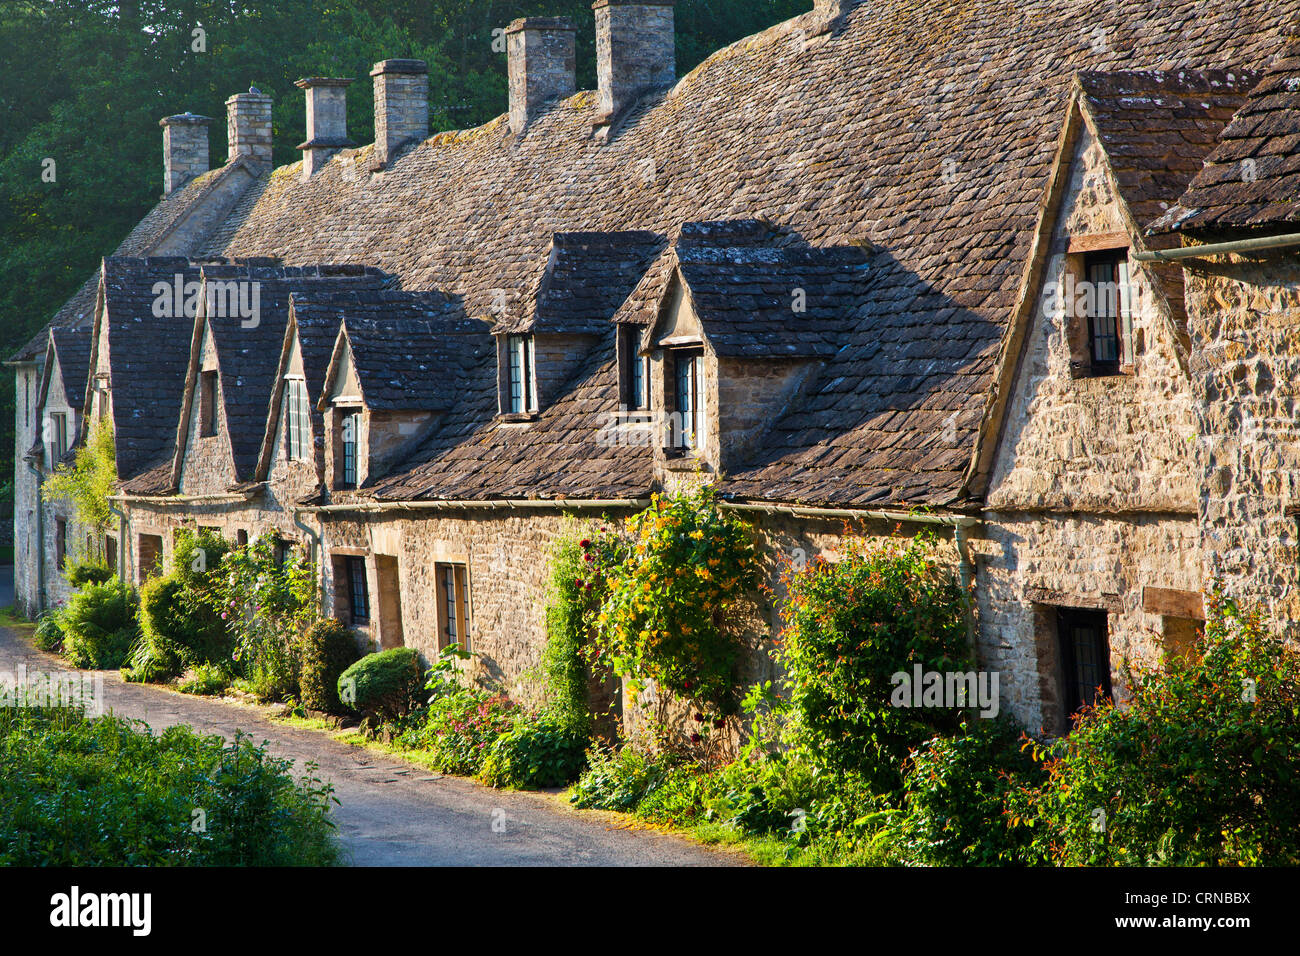 Famous row of weavers cottages,Arlington Row,built in 1380 as a monastic wool store. Bibury Cotswolds Gloucestershire England UK Stock Photo